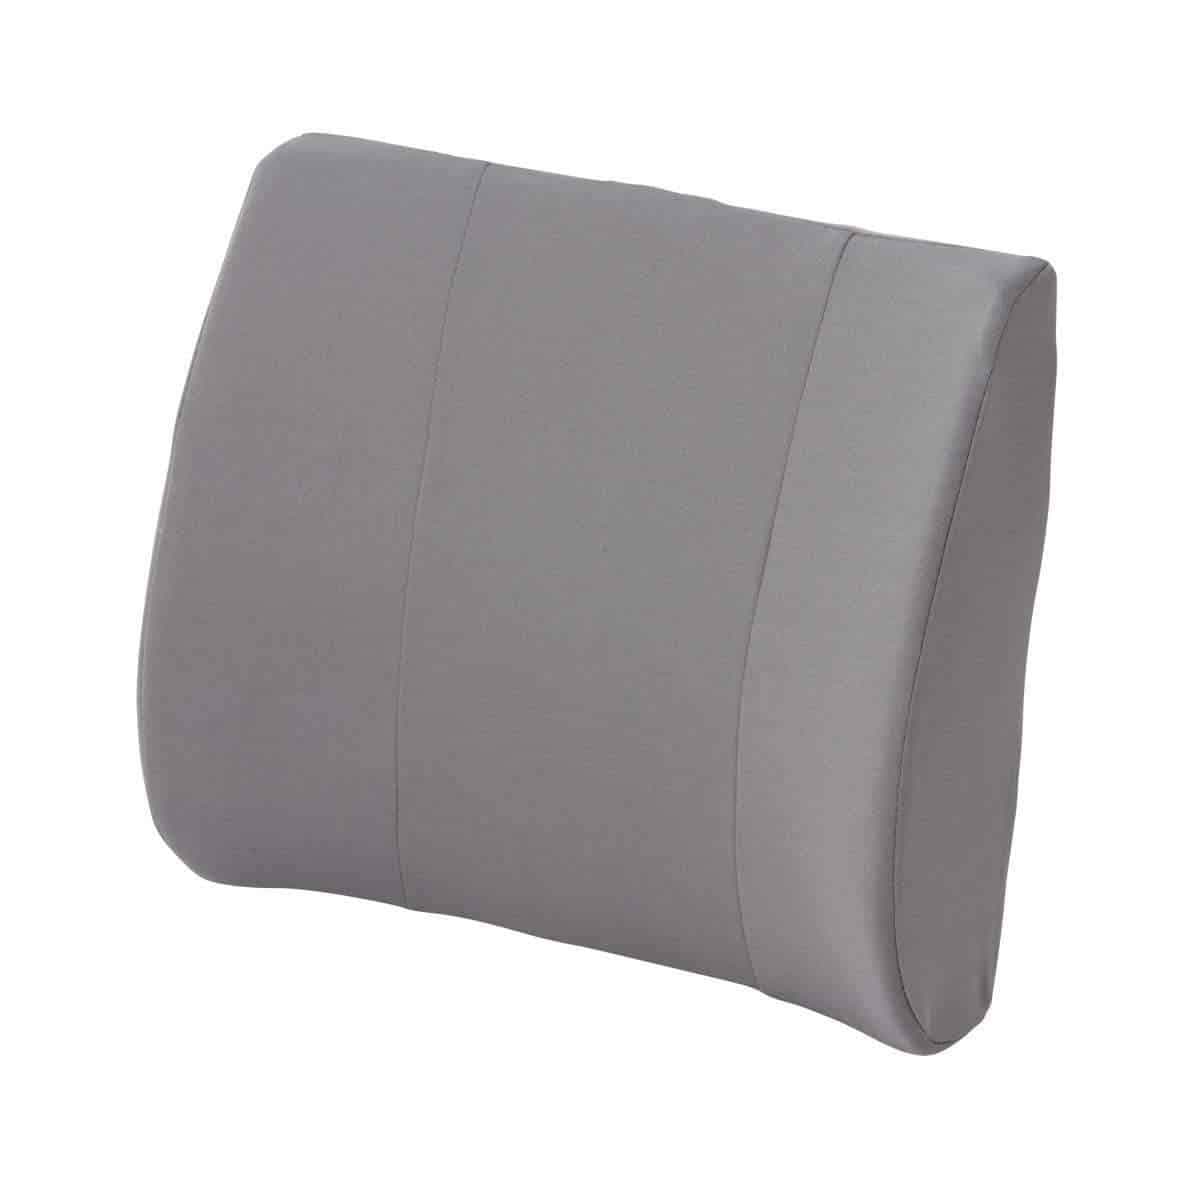 DMI Relax-a-Bac Lumbar Support Back Cushions with Insert and Strap